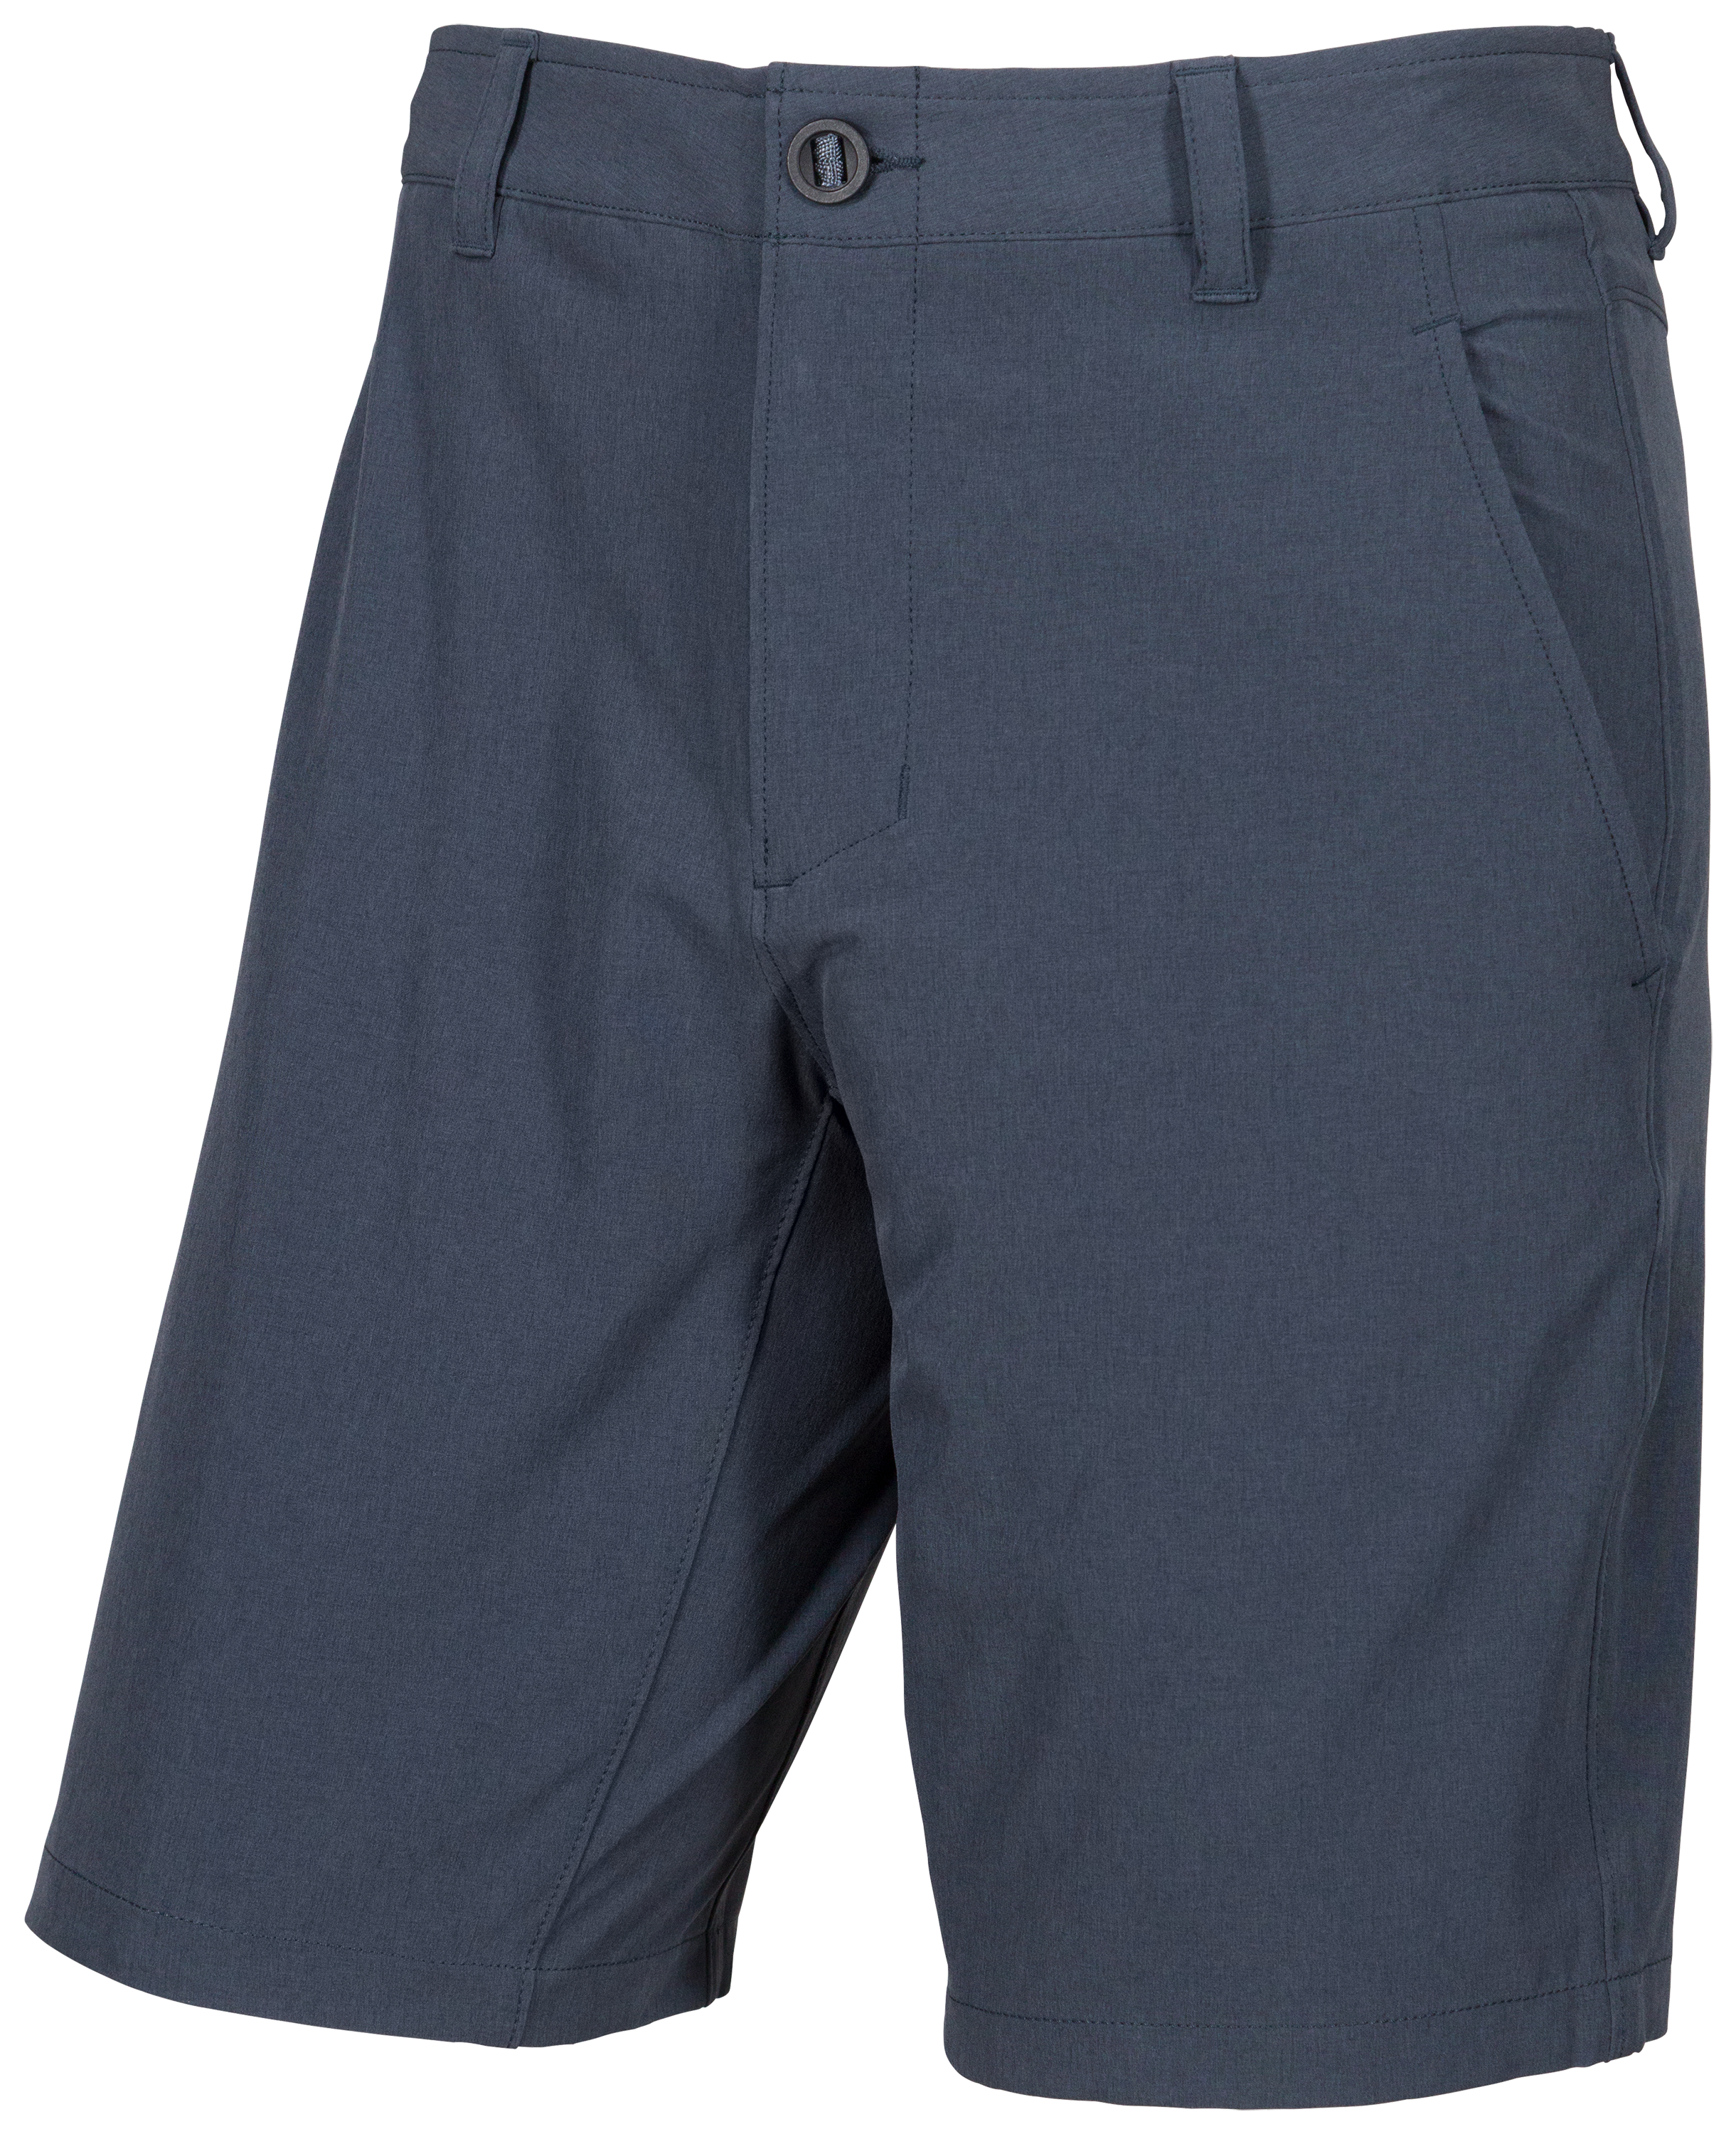 Under Armour Mantra Fishing Shorts for Men